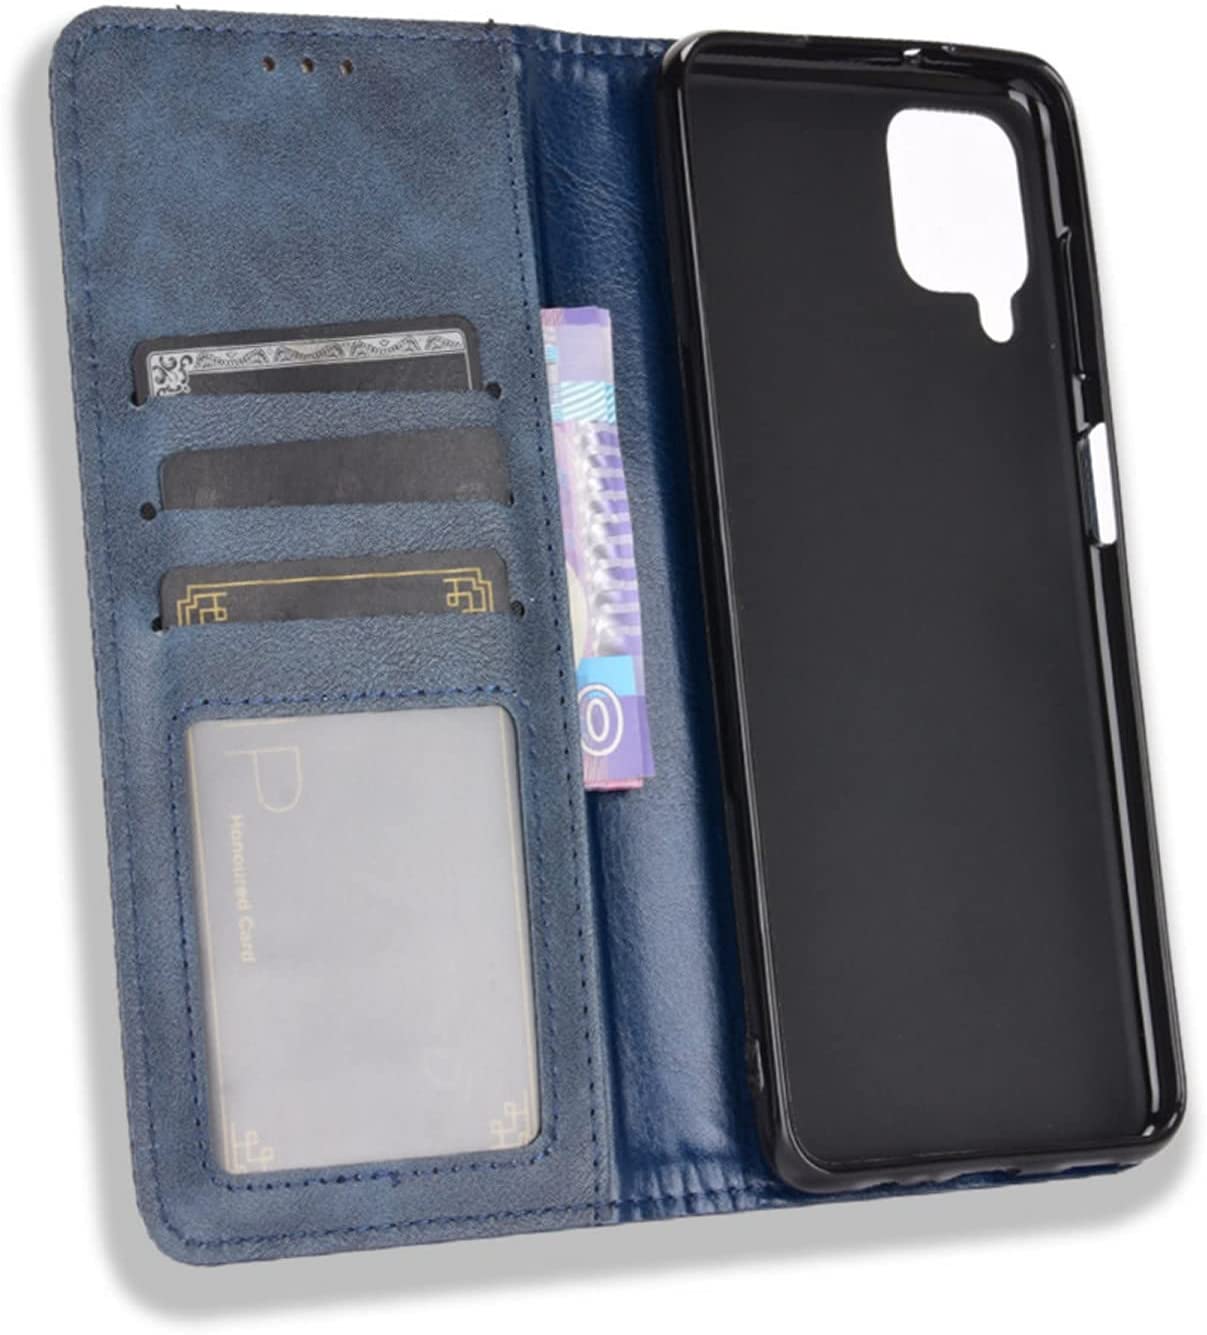 Samsung Galaxy M32 wallet flip cover case with soft tpu inner cover 